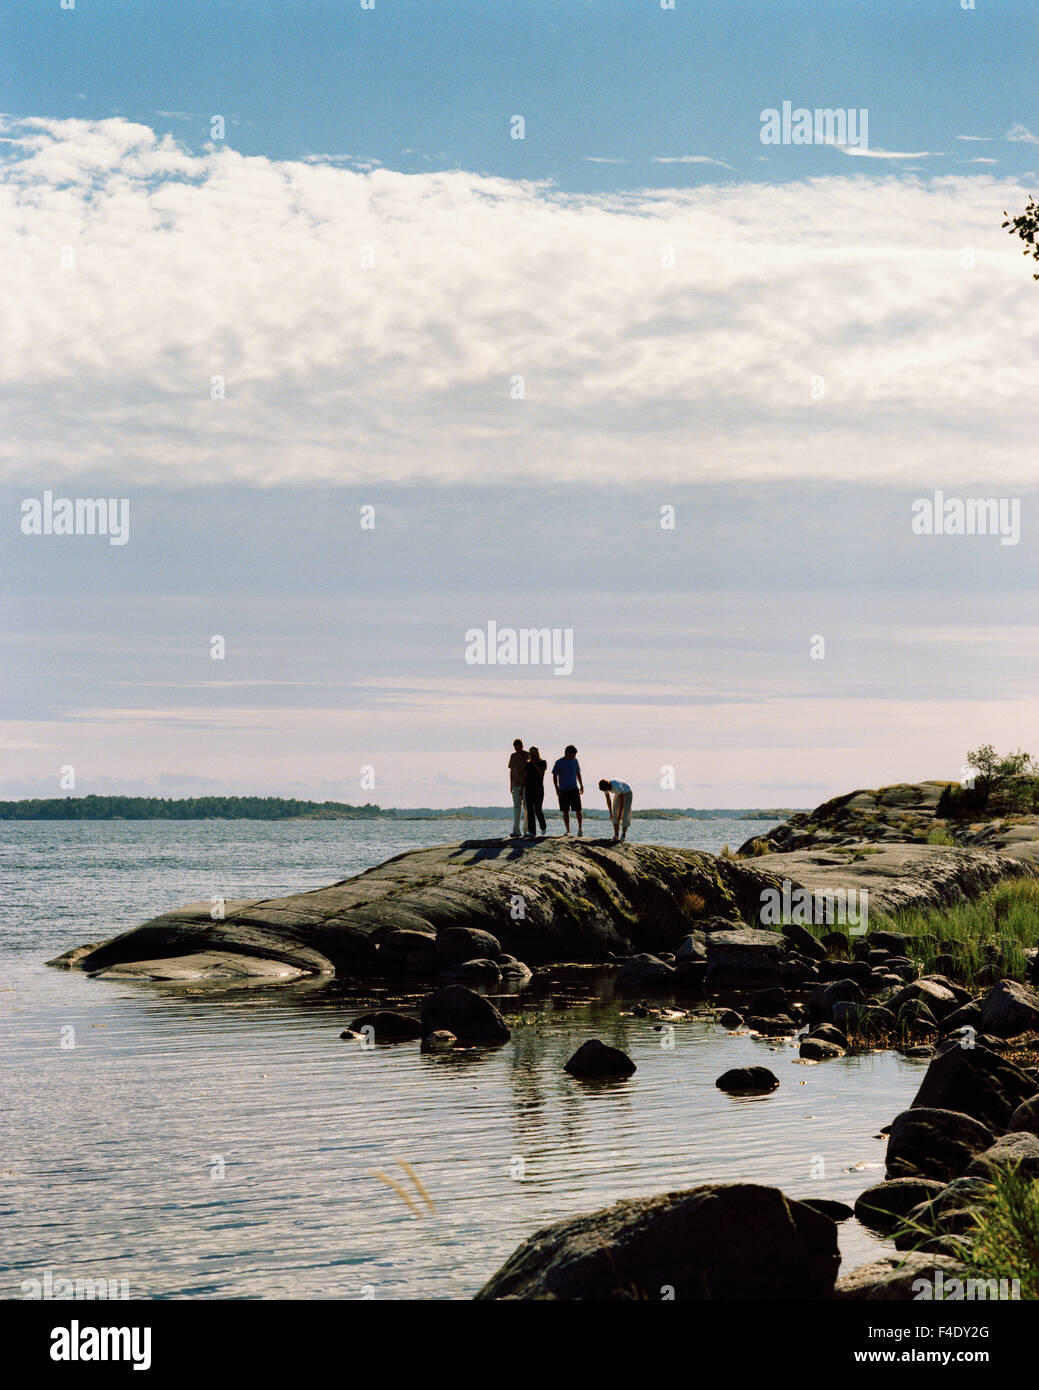 Four people standing on a bare cliff, Harstena, Gryt archipelago ...